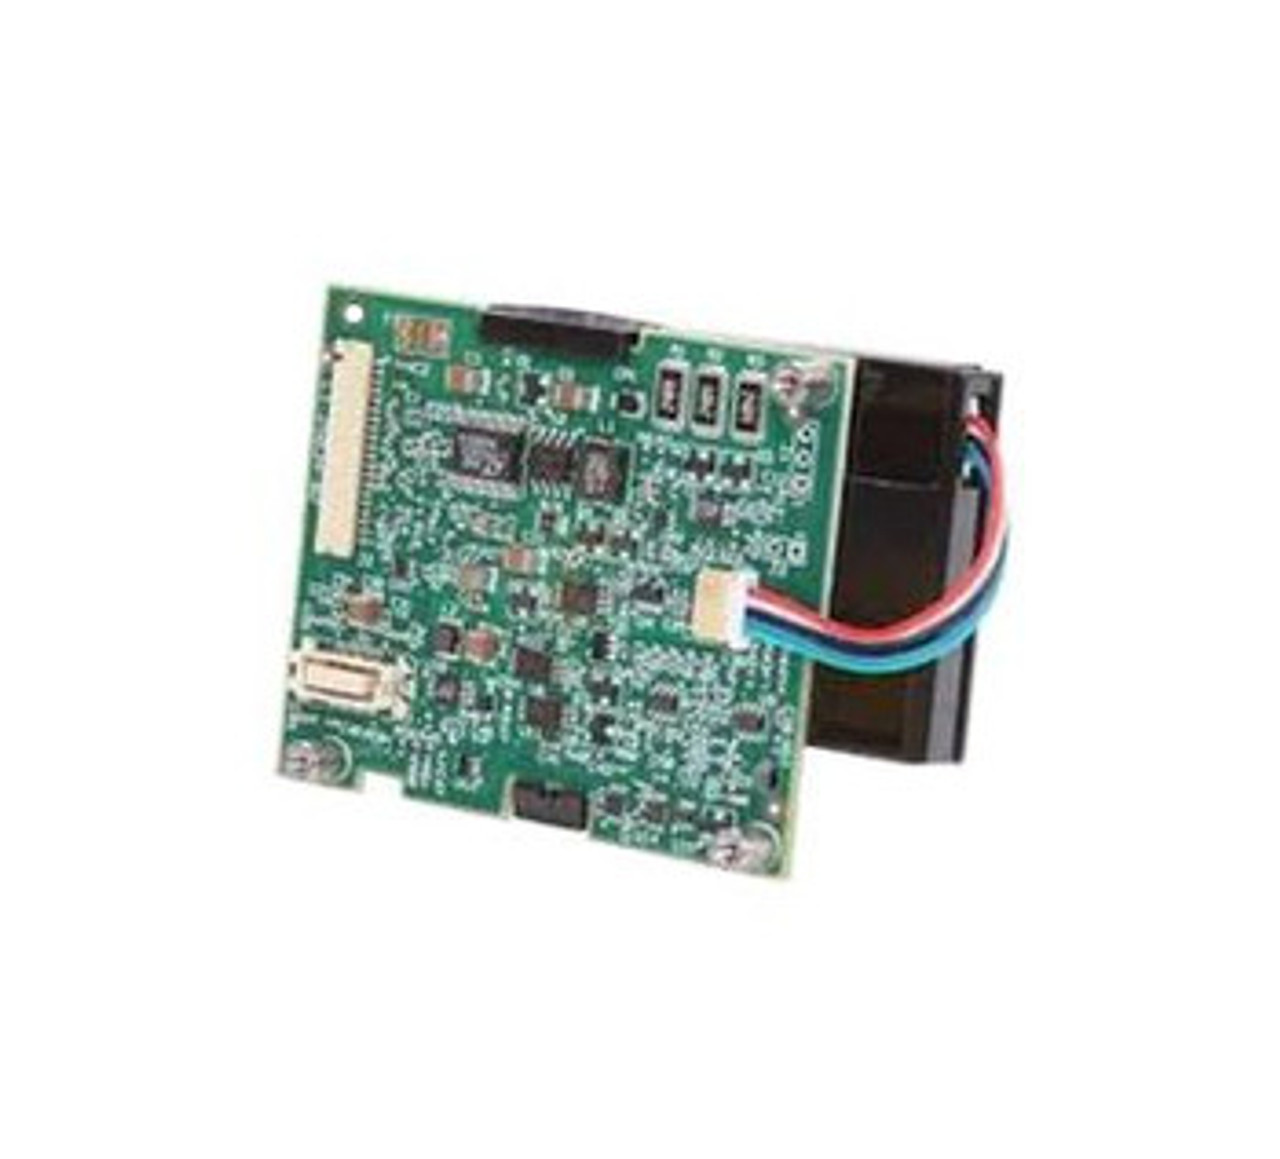 371-1784-01 | Sun | LVD RAID Controller with 512 MB Memory for StorEdge 3310 SCSI Array RoHS-5 Compliant